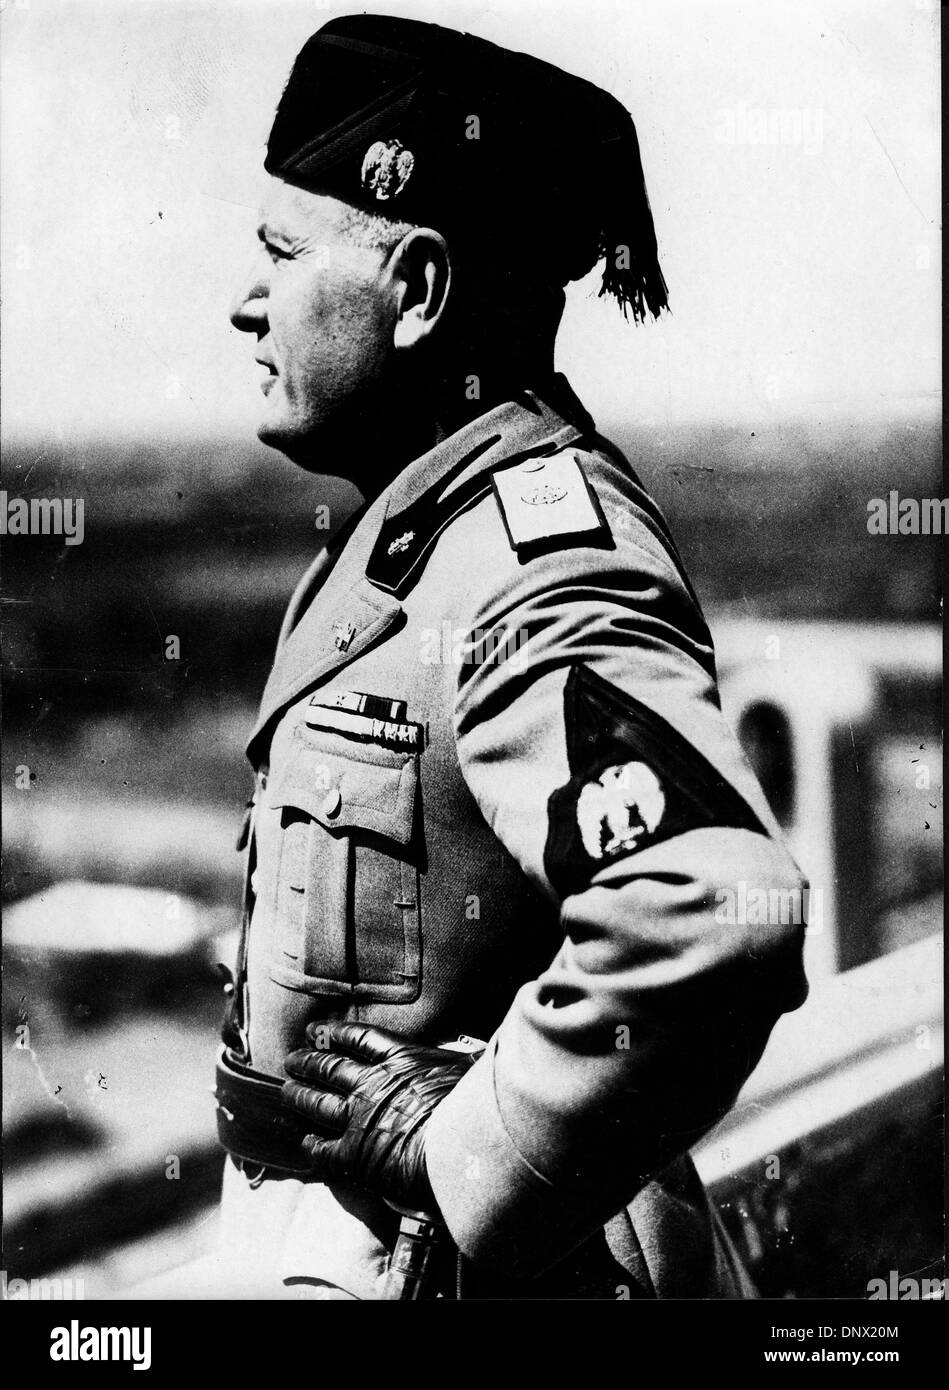 March 25, 1938 - Rome, Italy - BENITO MUSSOLINI (1883-1945) the Italian dictator and leader of the Fascist movement on the balcony of the Palazzio Venezia addressing the crowd. (Credit Image: © KEYSTONE Pictures/ZUMAPRESS.com) Stock Photo